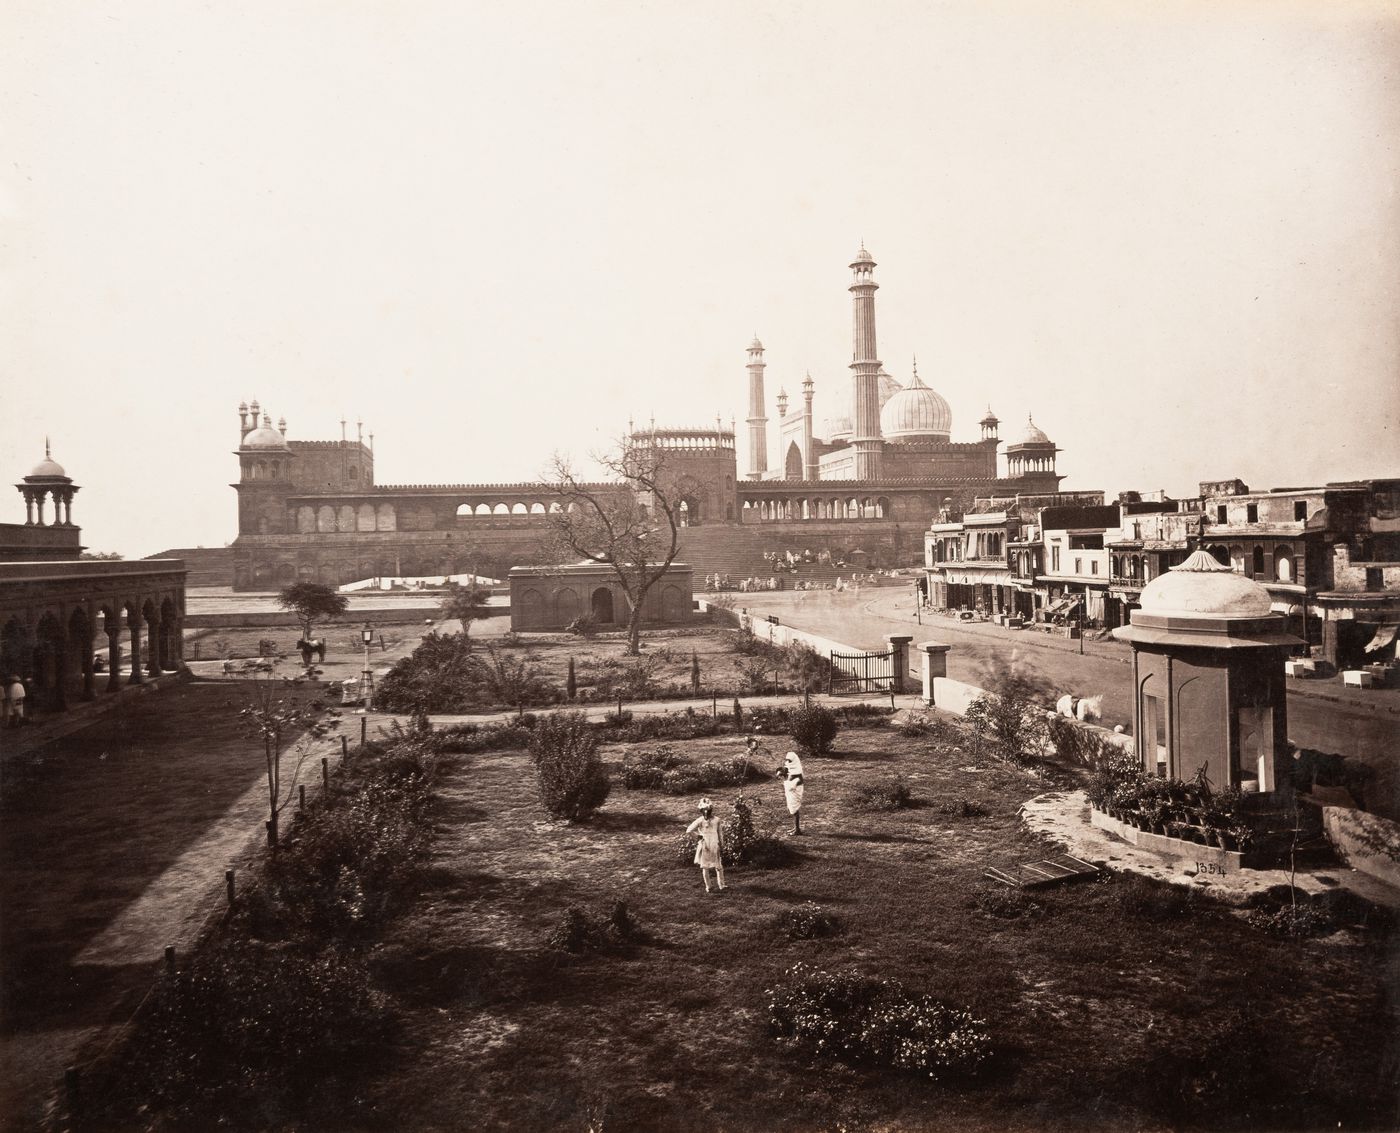 View of the Jami Masjid from the south showing commercial buildings on the right and a garden in the foreground, Delhi (now Delhi Union Territory), India